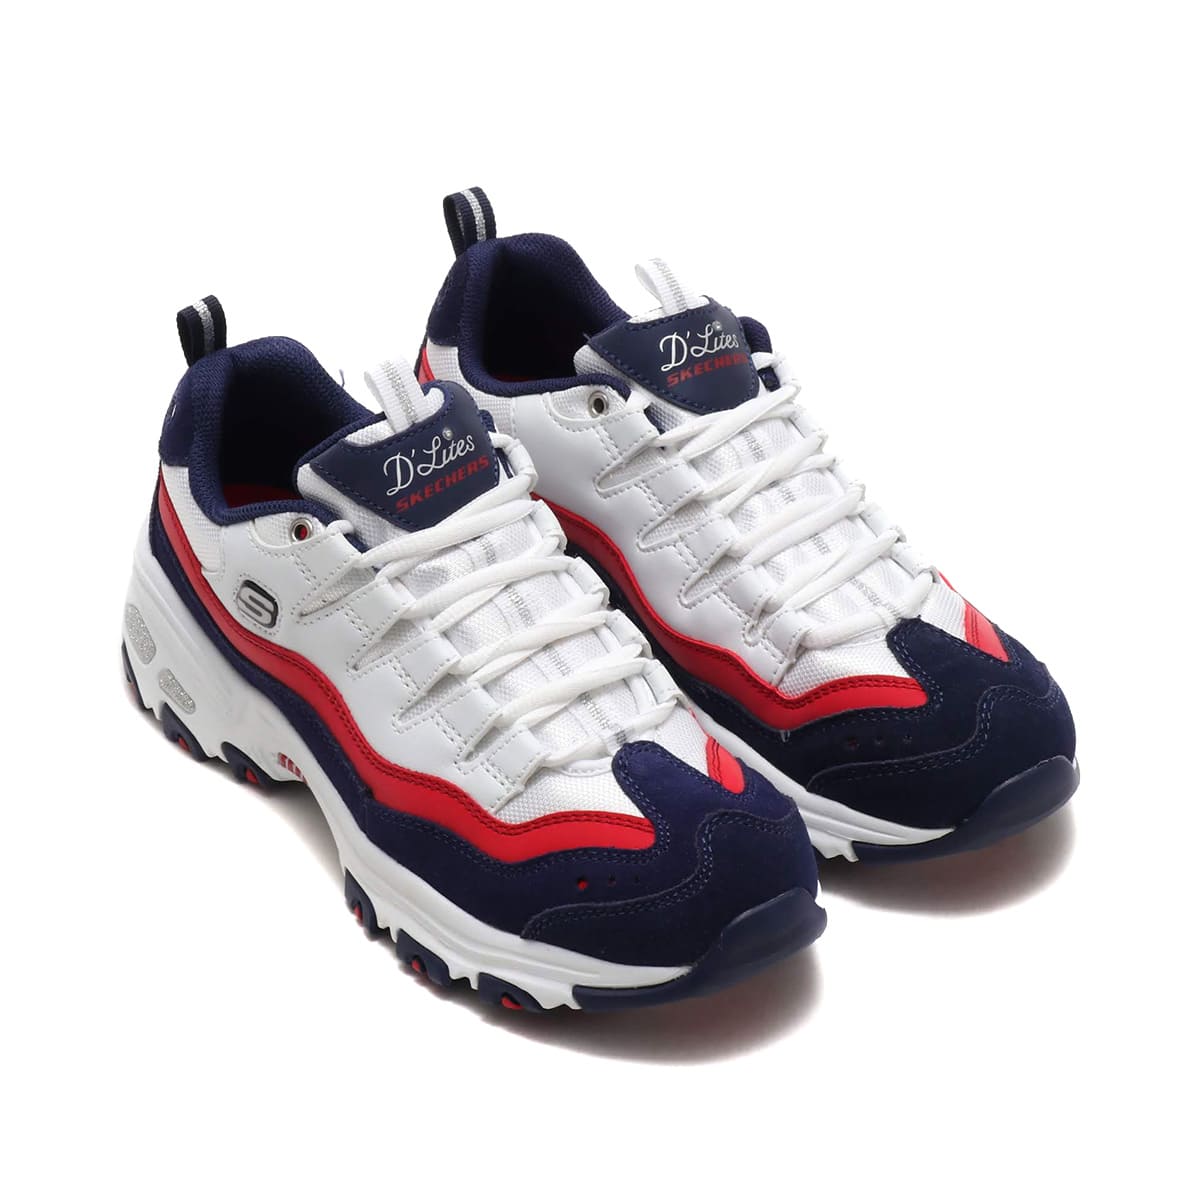 SKECHERS D'LITES-SURE THING WHITE/NAVY 